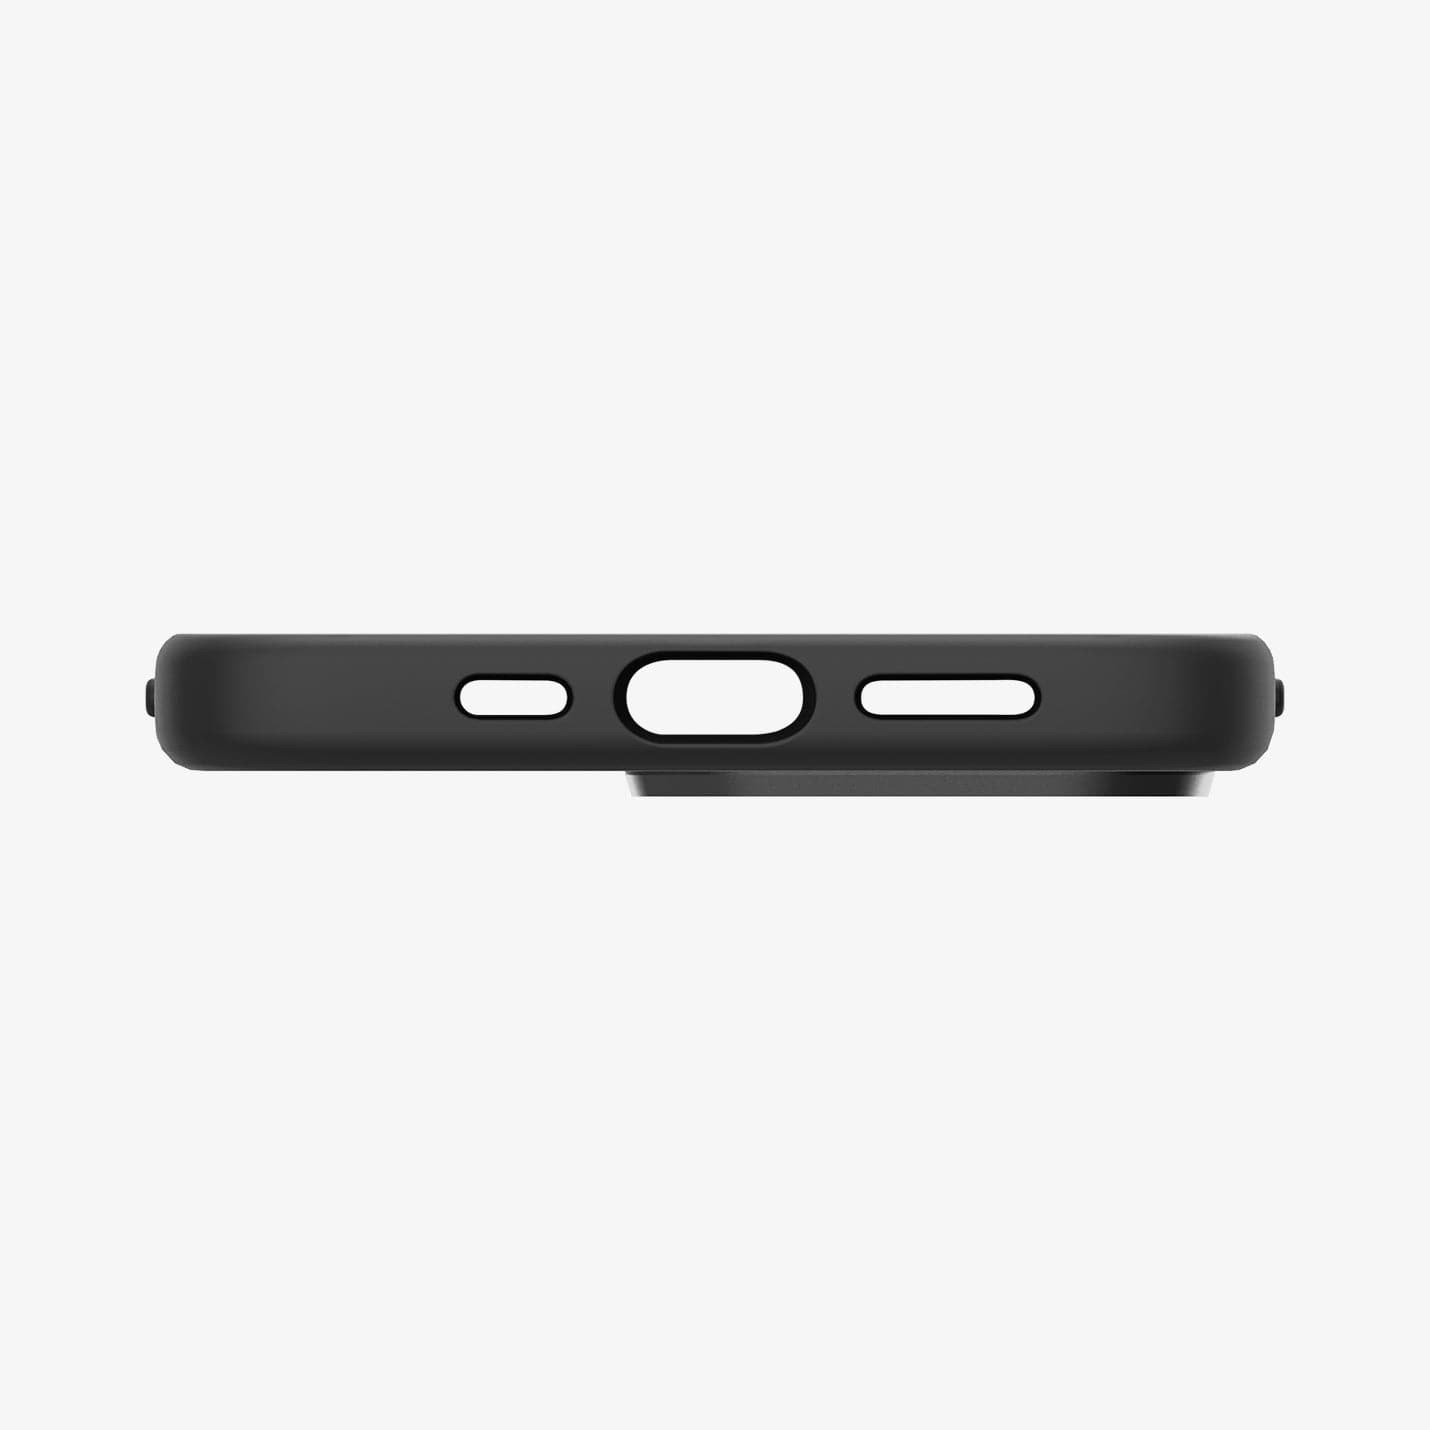 ACS04087 - iPhone 13 Pro Case Silicone Fit Mag (Mag Fit) in black showing the bottom with precise cutouts